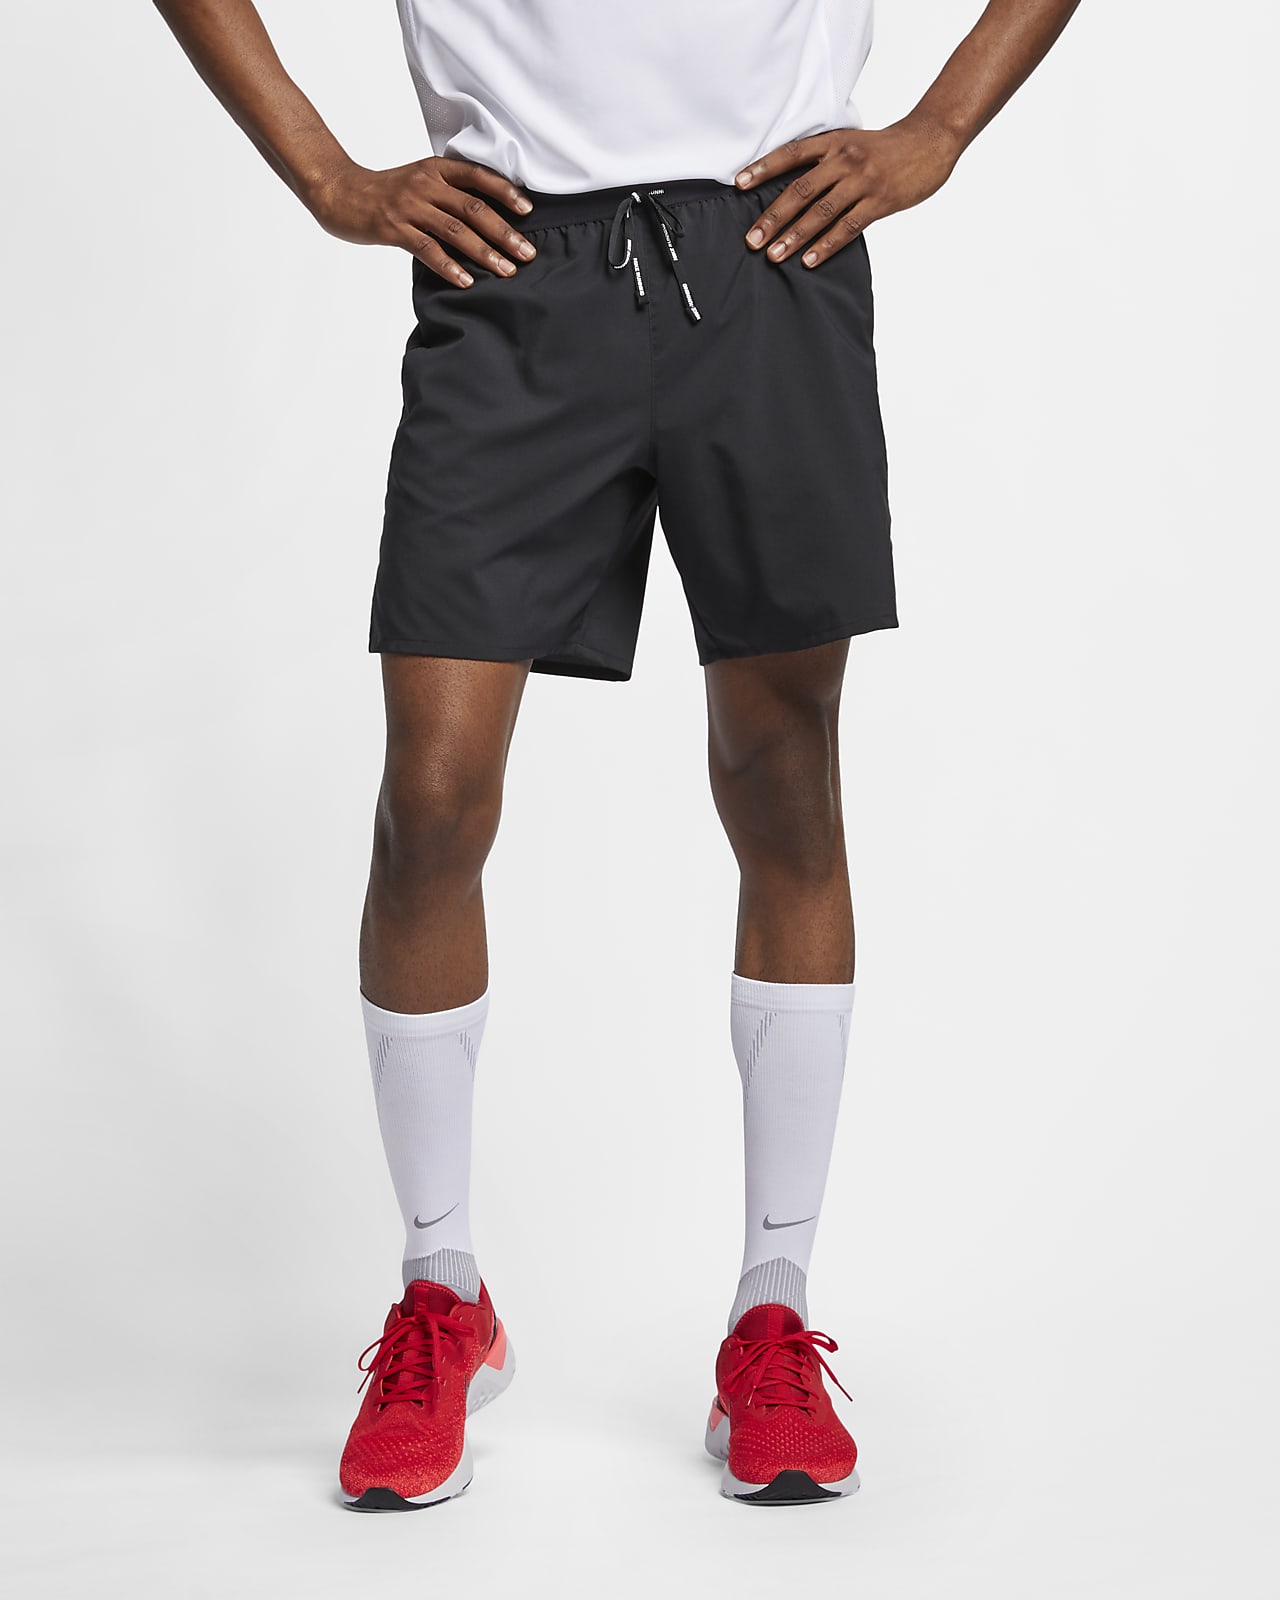 Brief-Lined Running Shorts. Nike MA